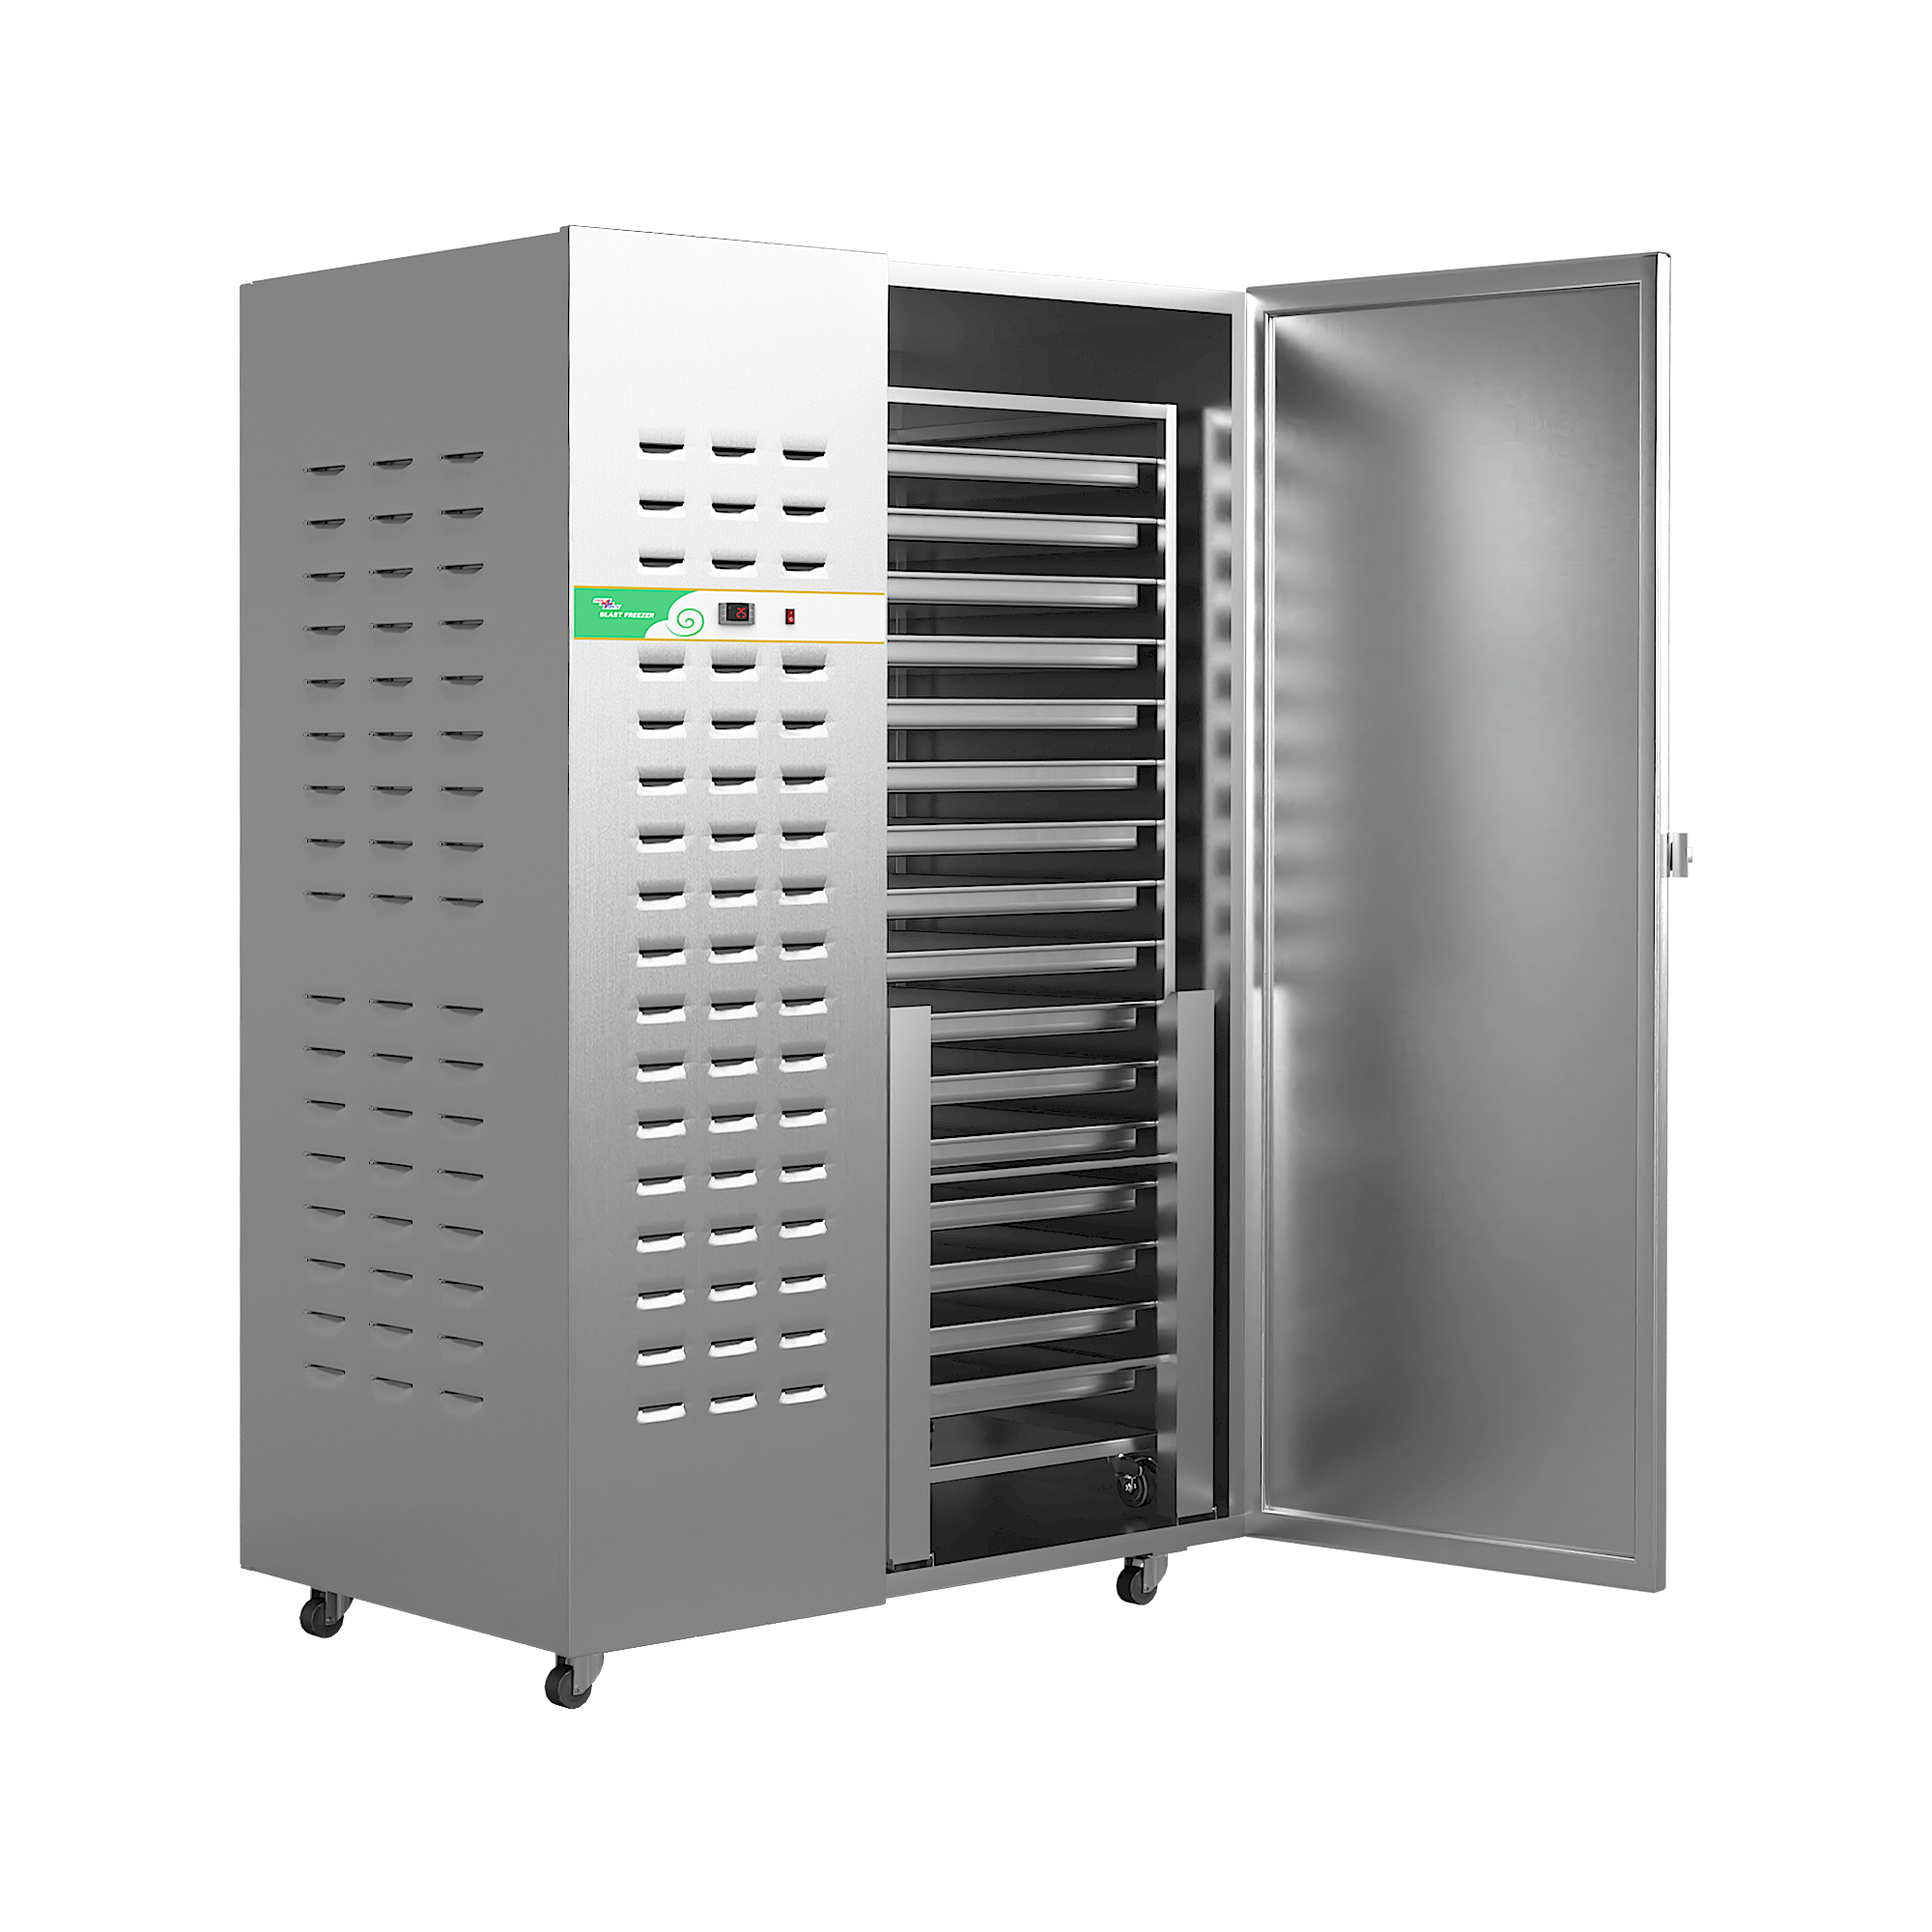 What channels can I buy a suitable blast freezer?